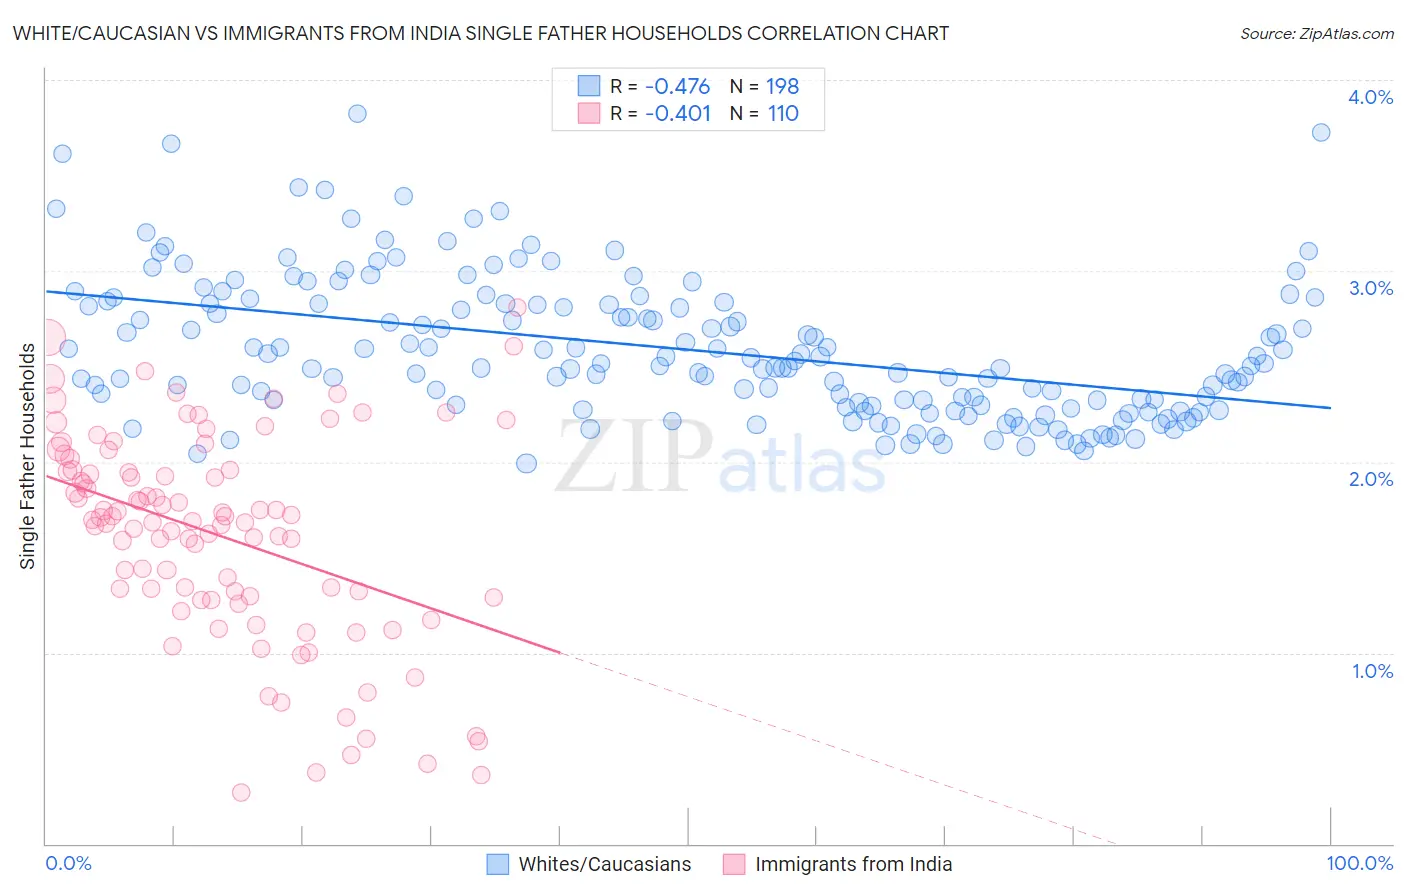 White/Caucasian vs Immigrants from India Single Father Households